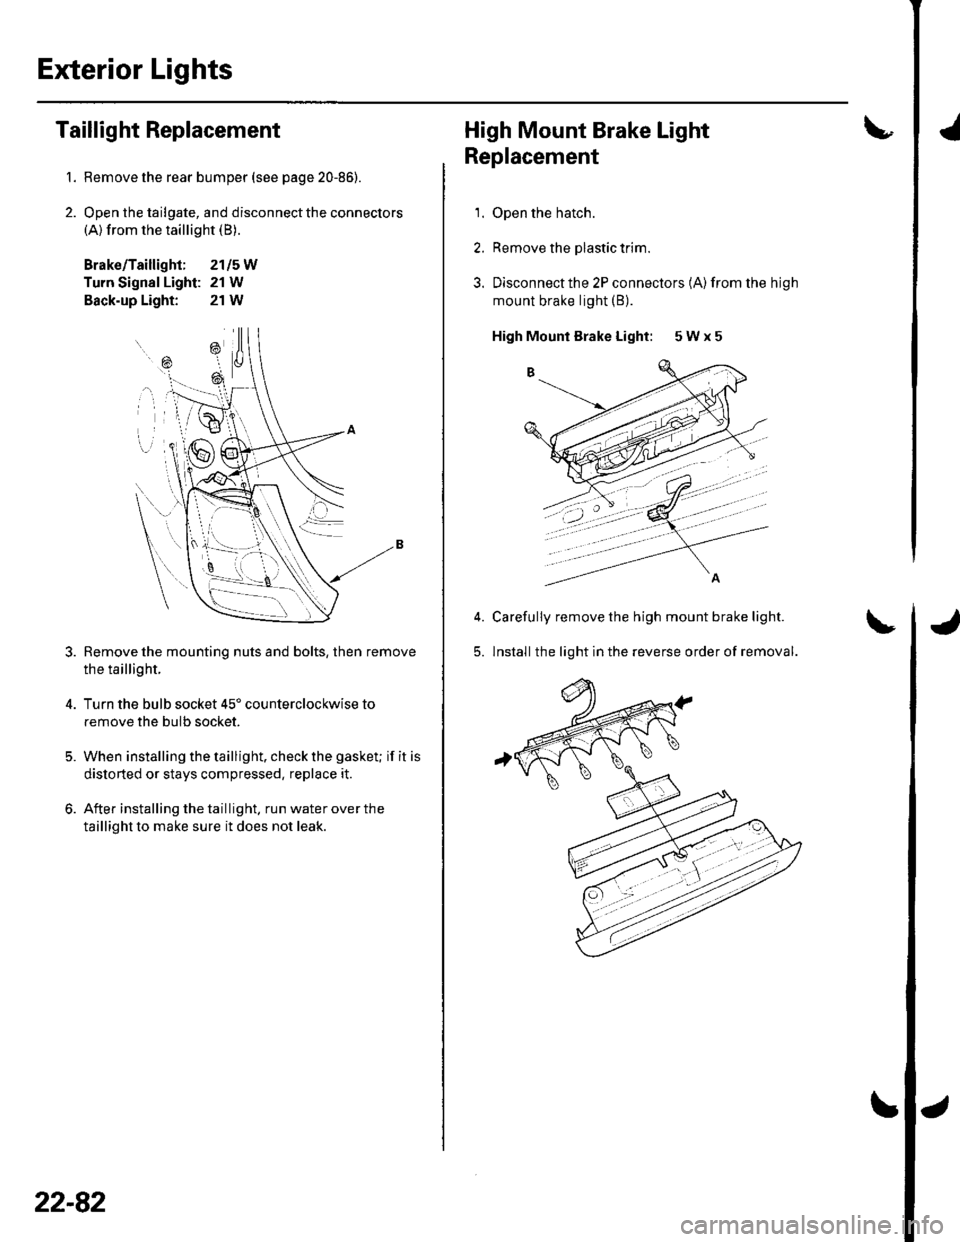 HONDA CIVIC 2002 7.G Workshop Manual Exterior Lights
1.
2.
Taillight Replacement
Remove the rear bumper (see page 20-86).
Open the tailgate, and disconnect the connectors(A) from the taillight (B).
Brako/Taillight; 2115W
Turn Signal Ligh